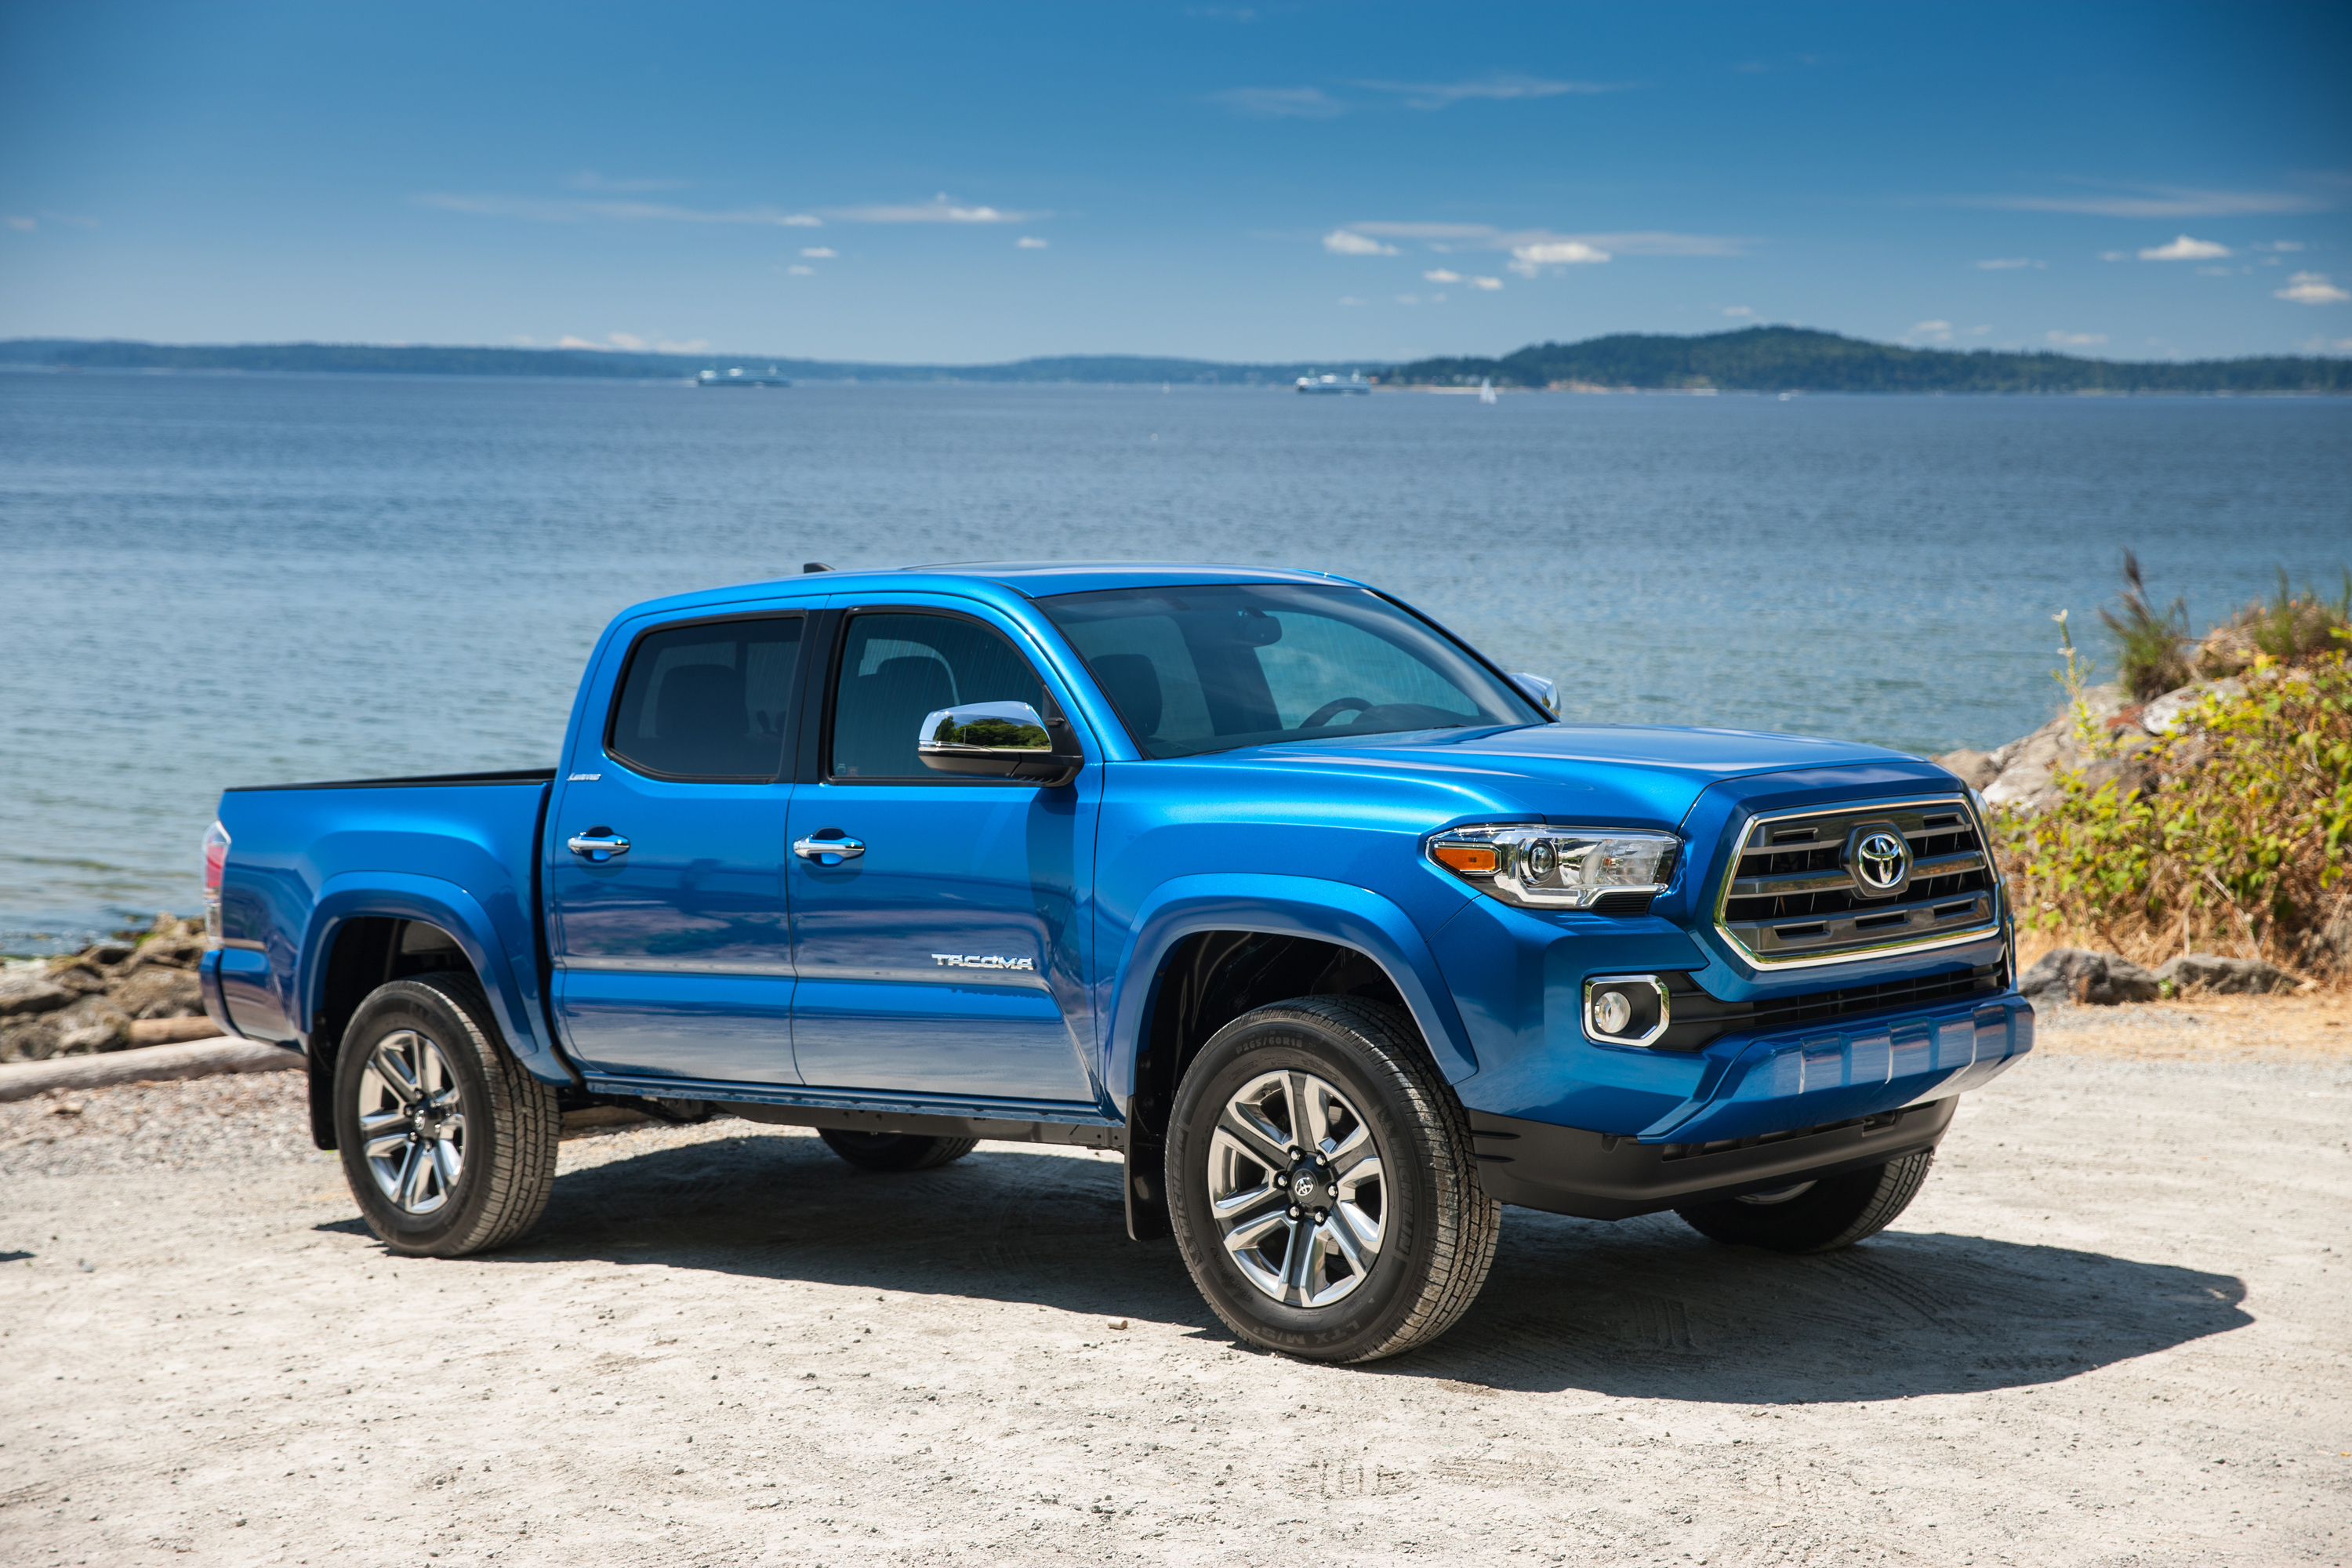 3000x2000 10+ Toyota Tacoma HD Wallpapers and Backgrounds